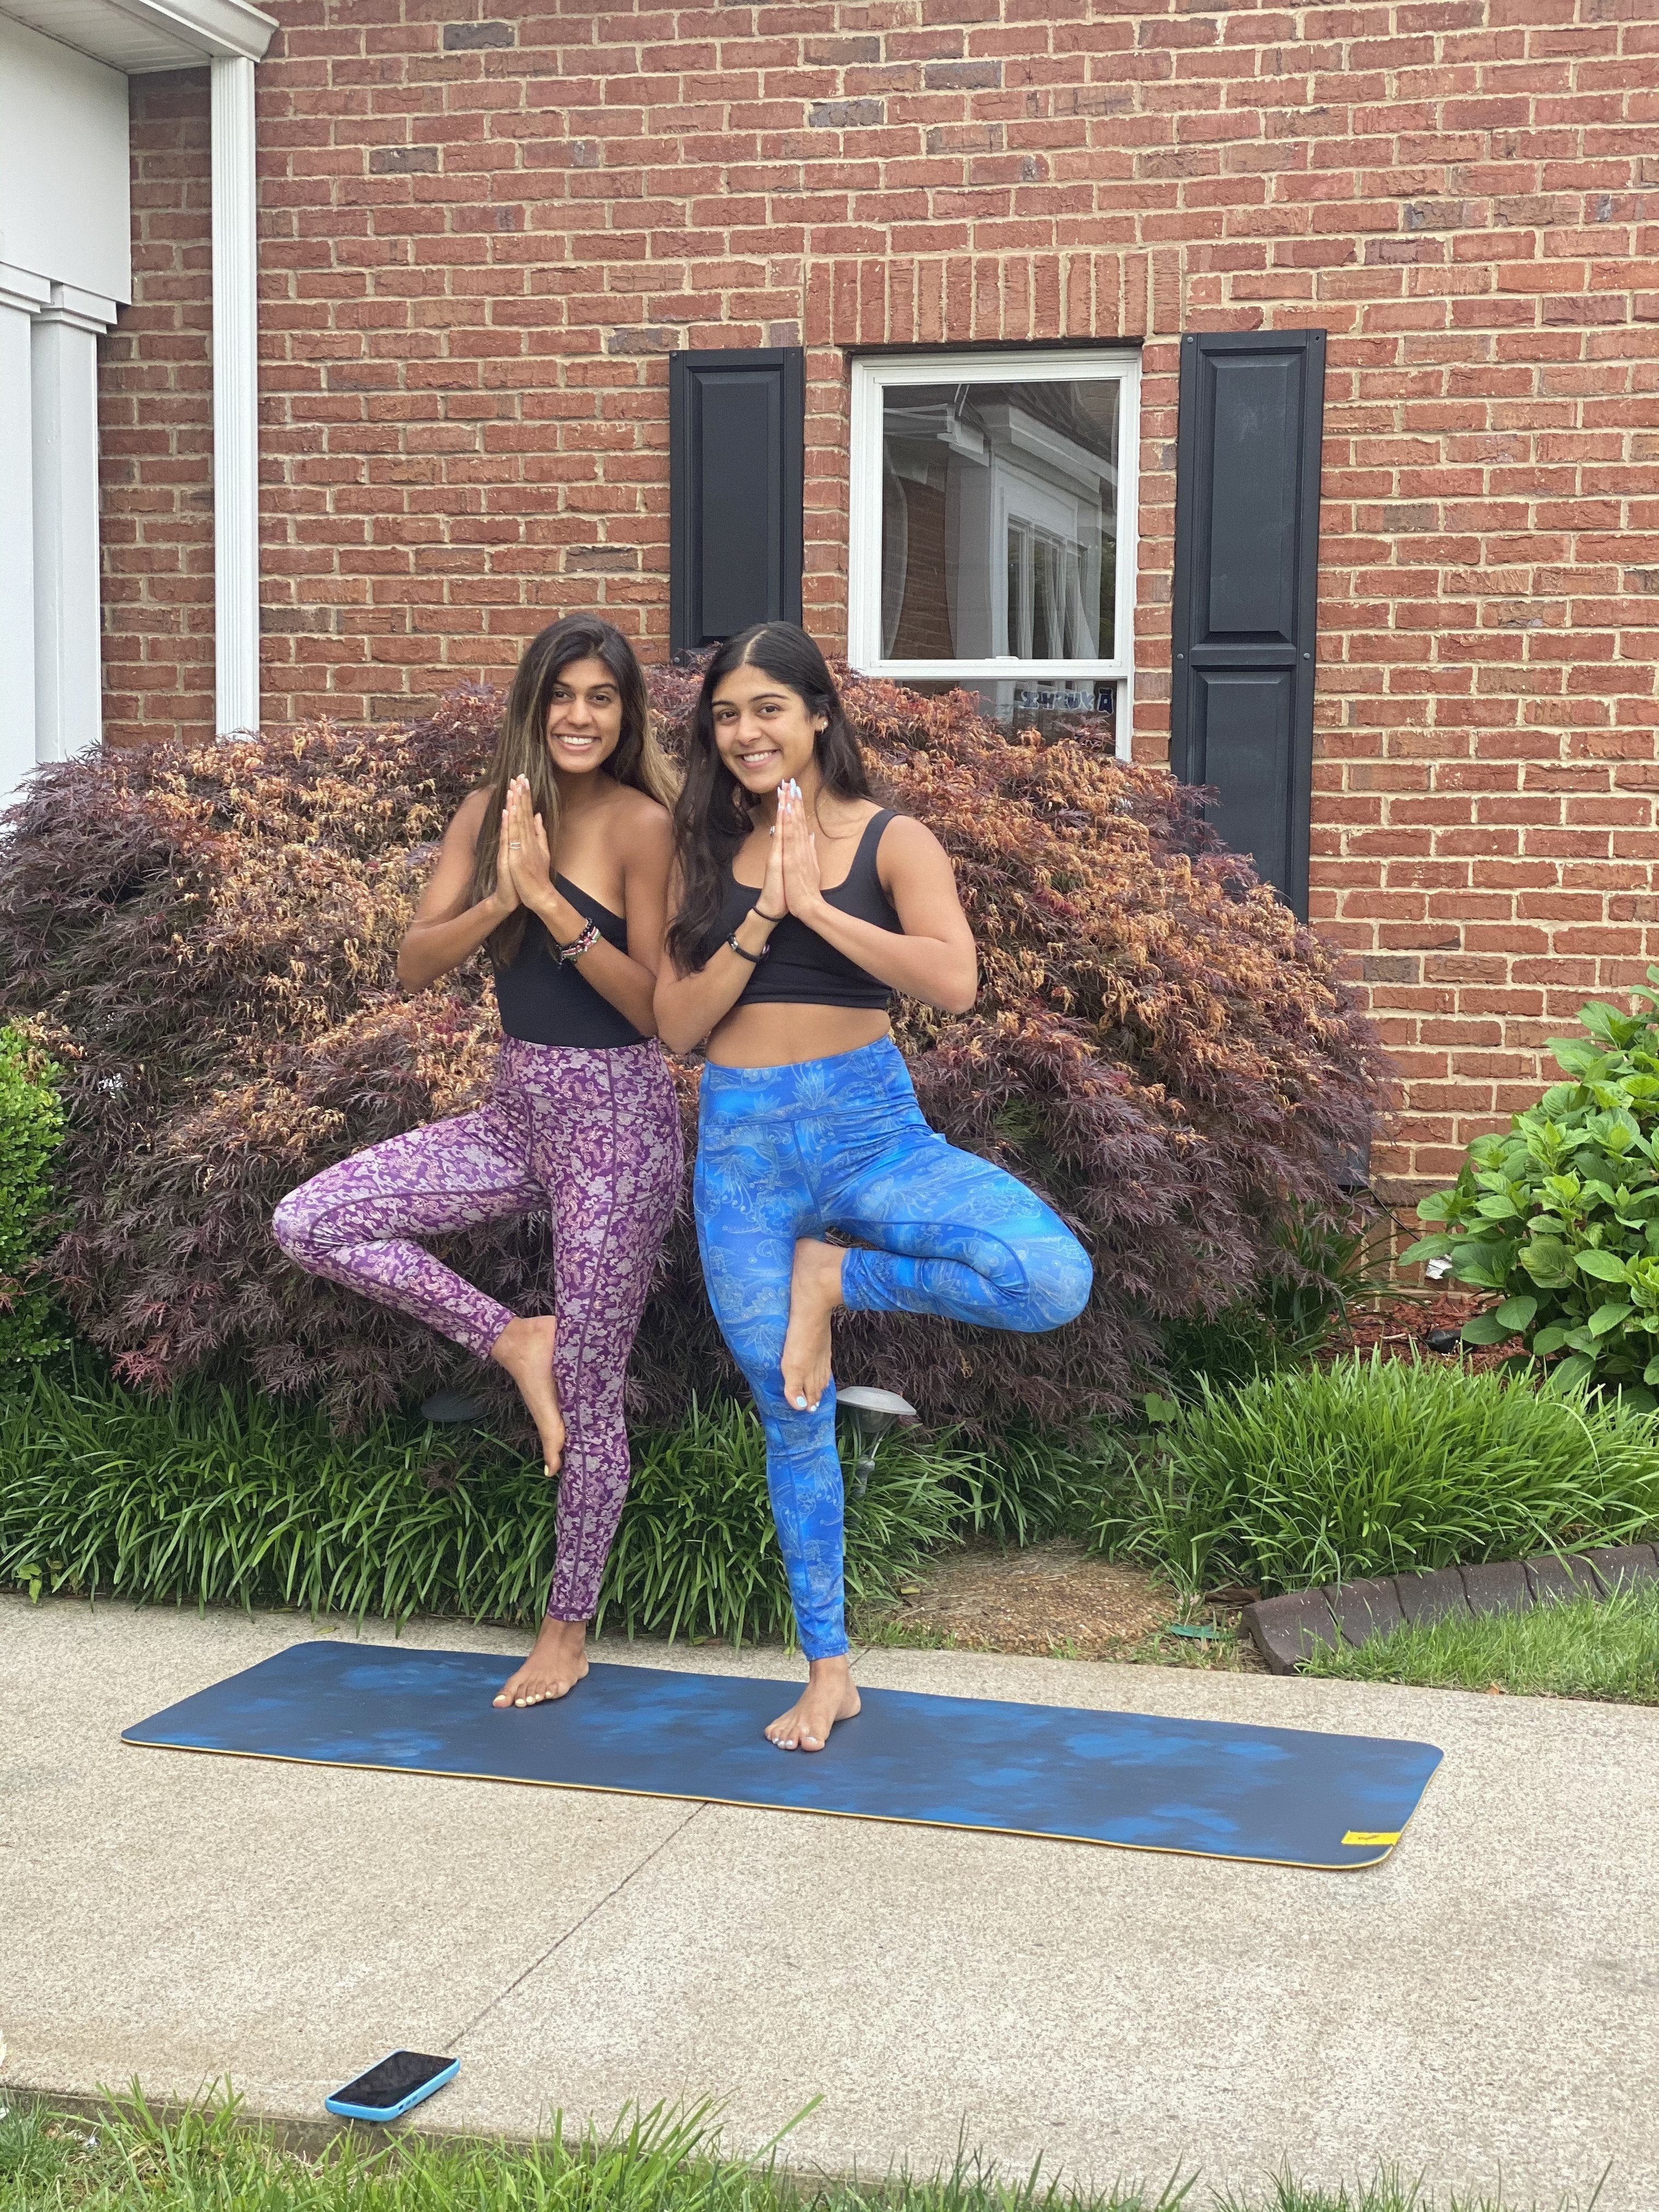 Yustha Yoga is South Asian inspired athleisure founded by two sisters, Ayushi and Astha. We grew up doing yoga with our grandparents on their “chhat